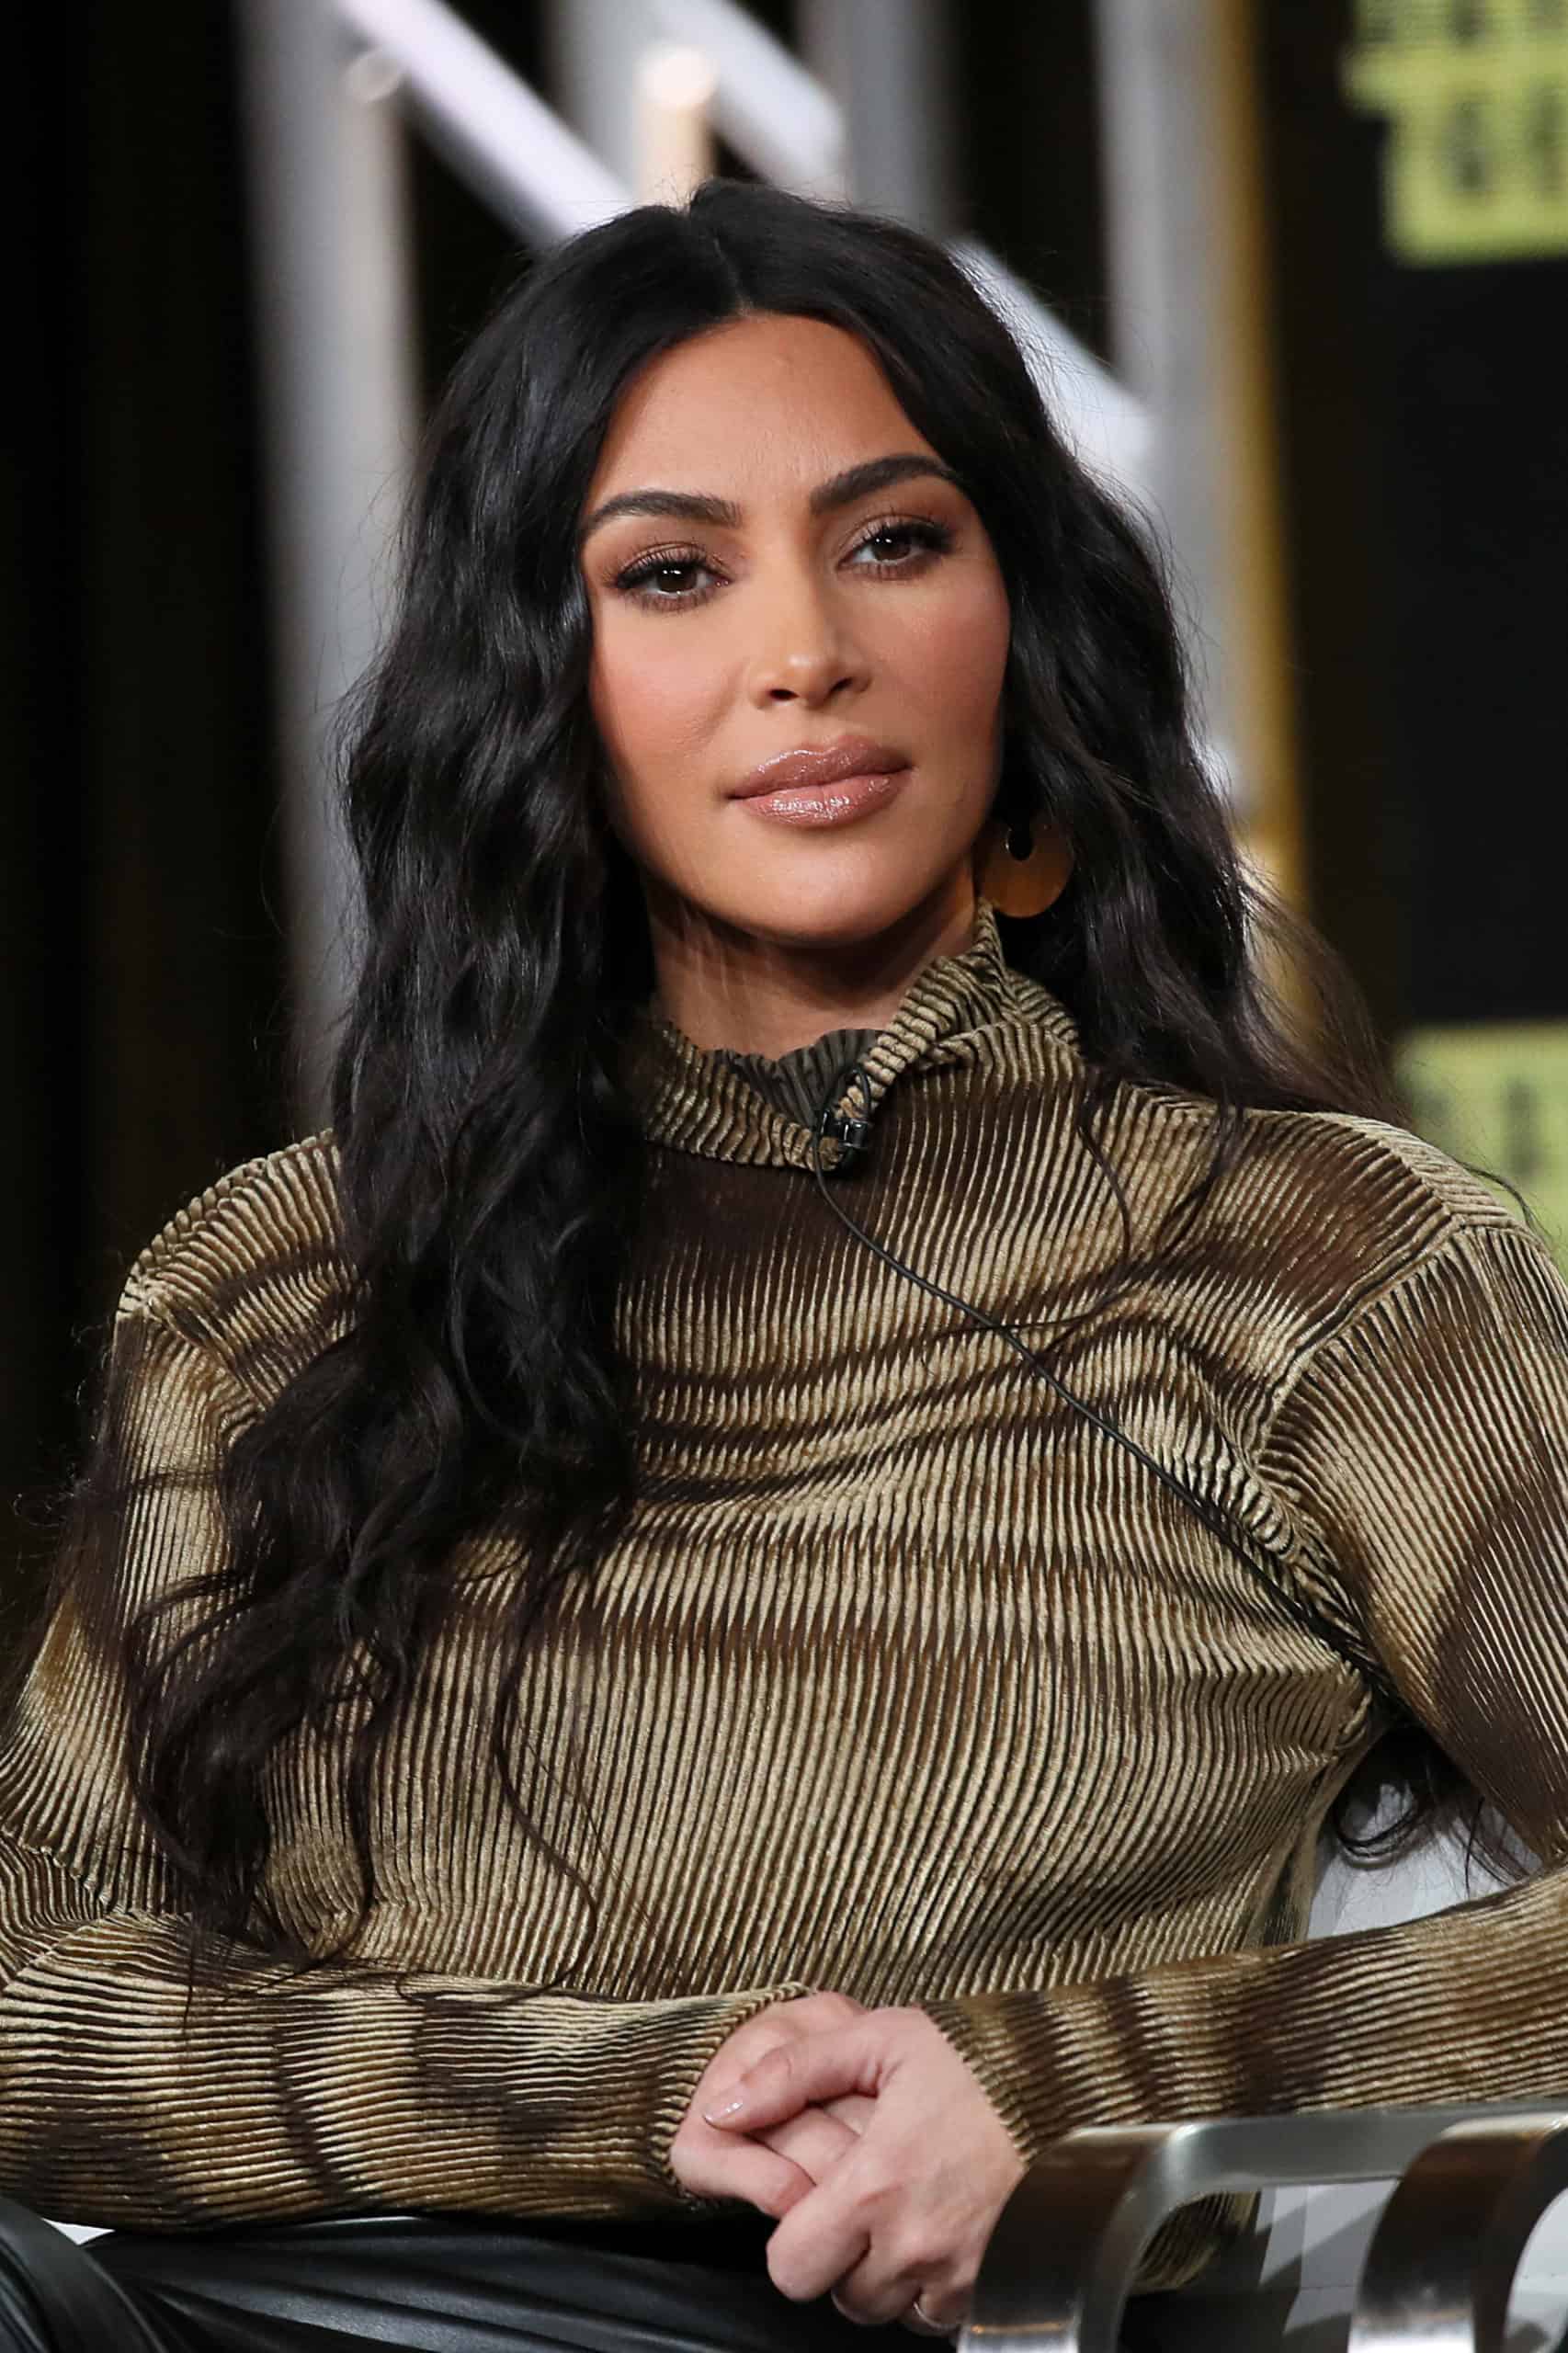 Kim Kardashian Addresses Blackfishing & Cultural Appropriation Claims–“I’ve Learned & Grown Over The Years & Figured Out Good Ways To Communicate With All My Kids About All This”